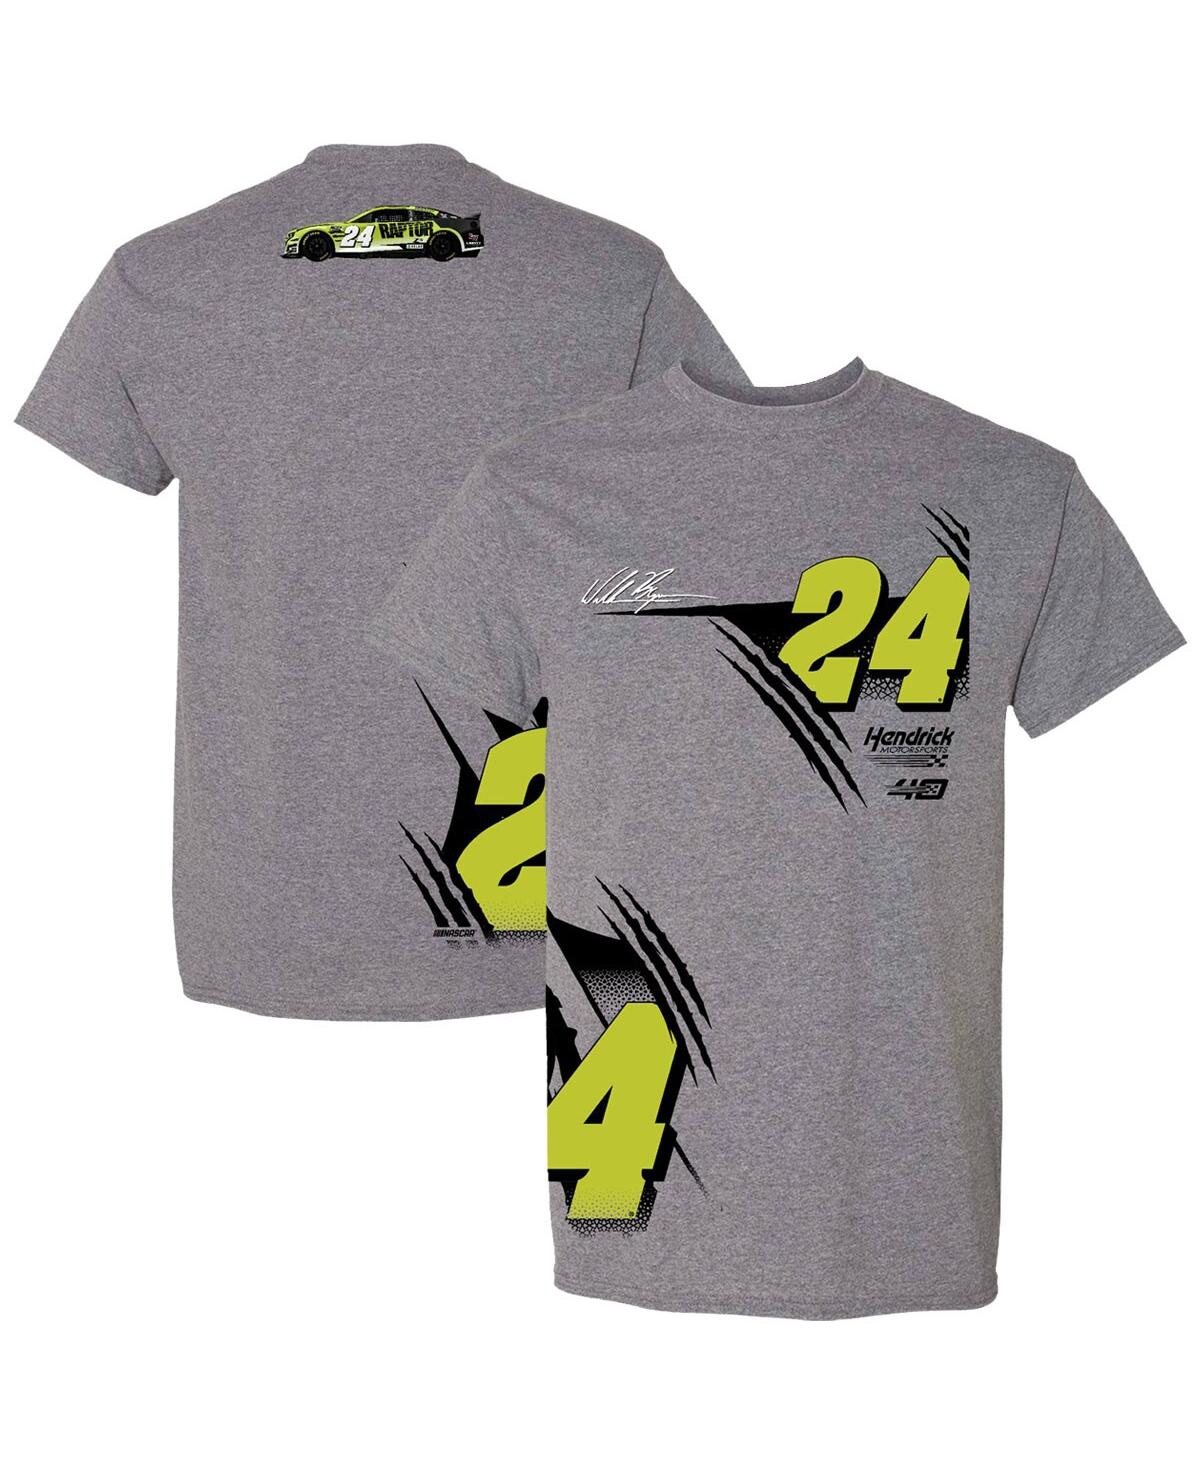 Men's Hendrick Motorsports Team Collection Heather Charcoal William Byron Raptor T-shirt - Heather Charcoal